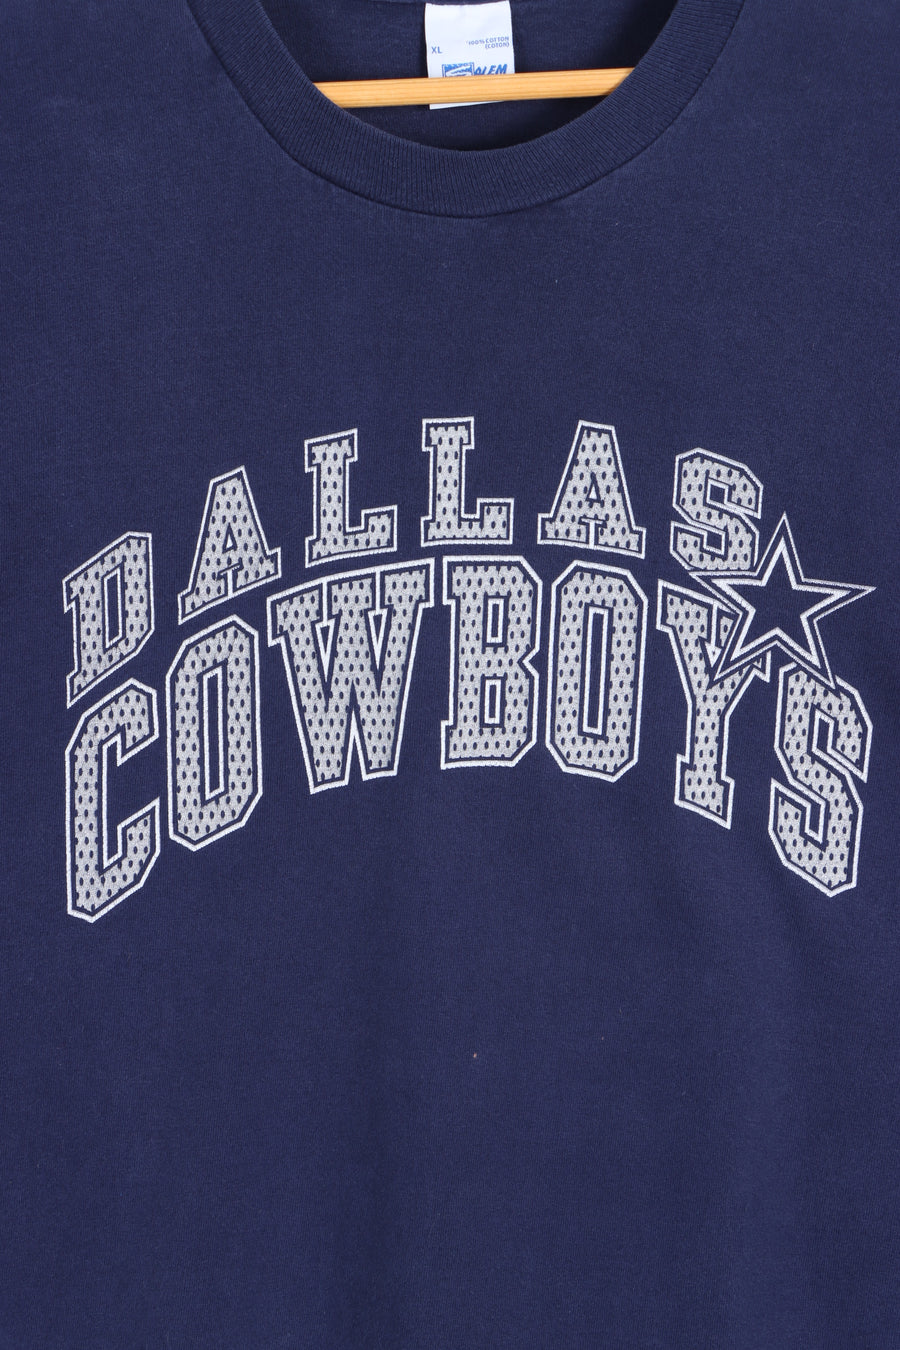 Dallas Cowboys Spell Out Single Stitch T-Shirt USA Made (XL) - Vintage Sole Melbourne